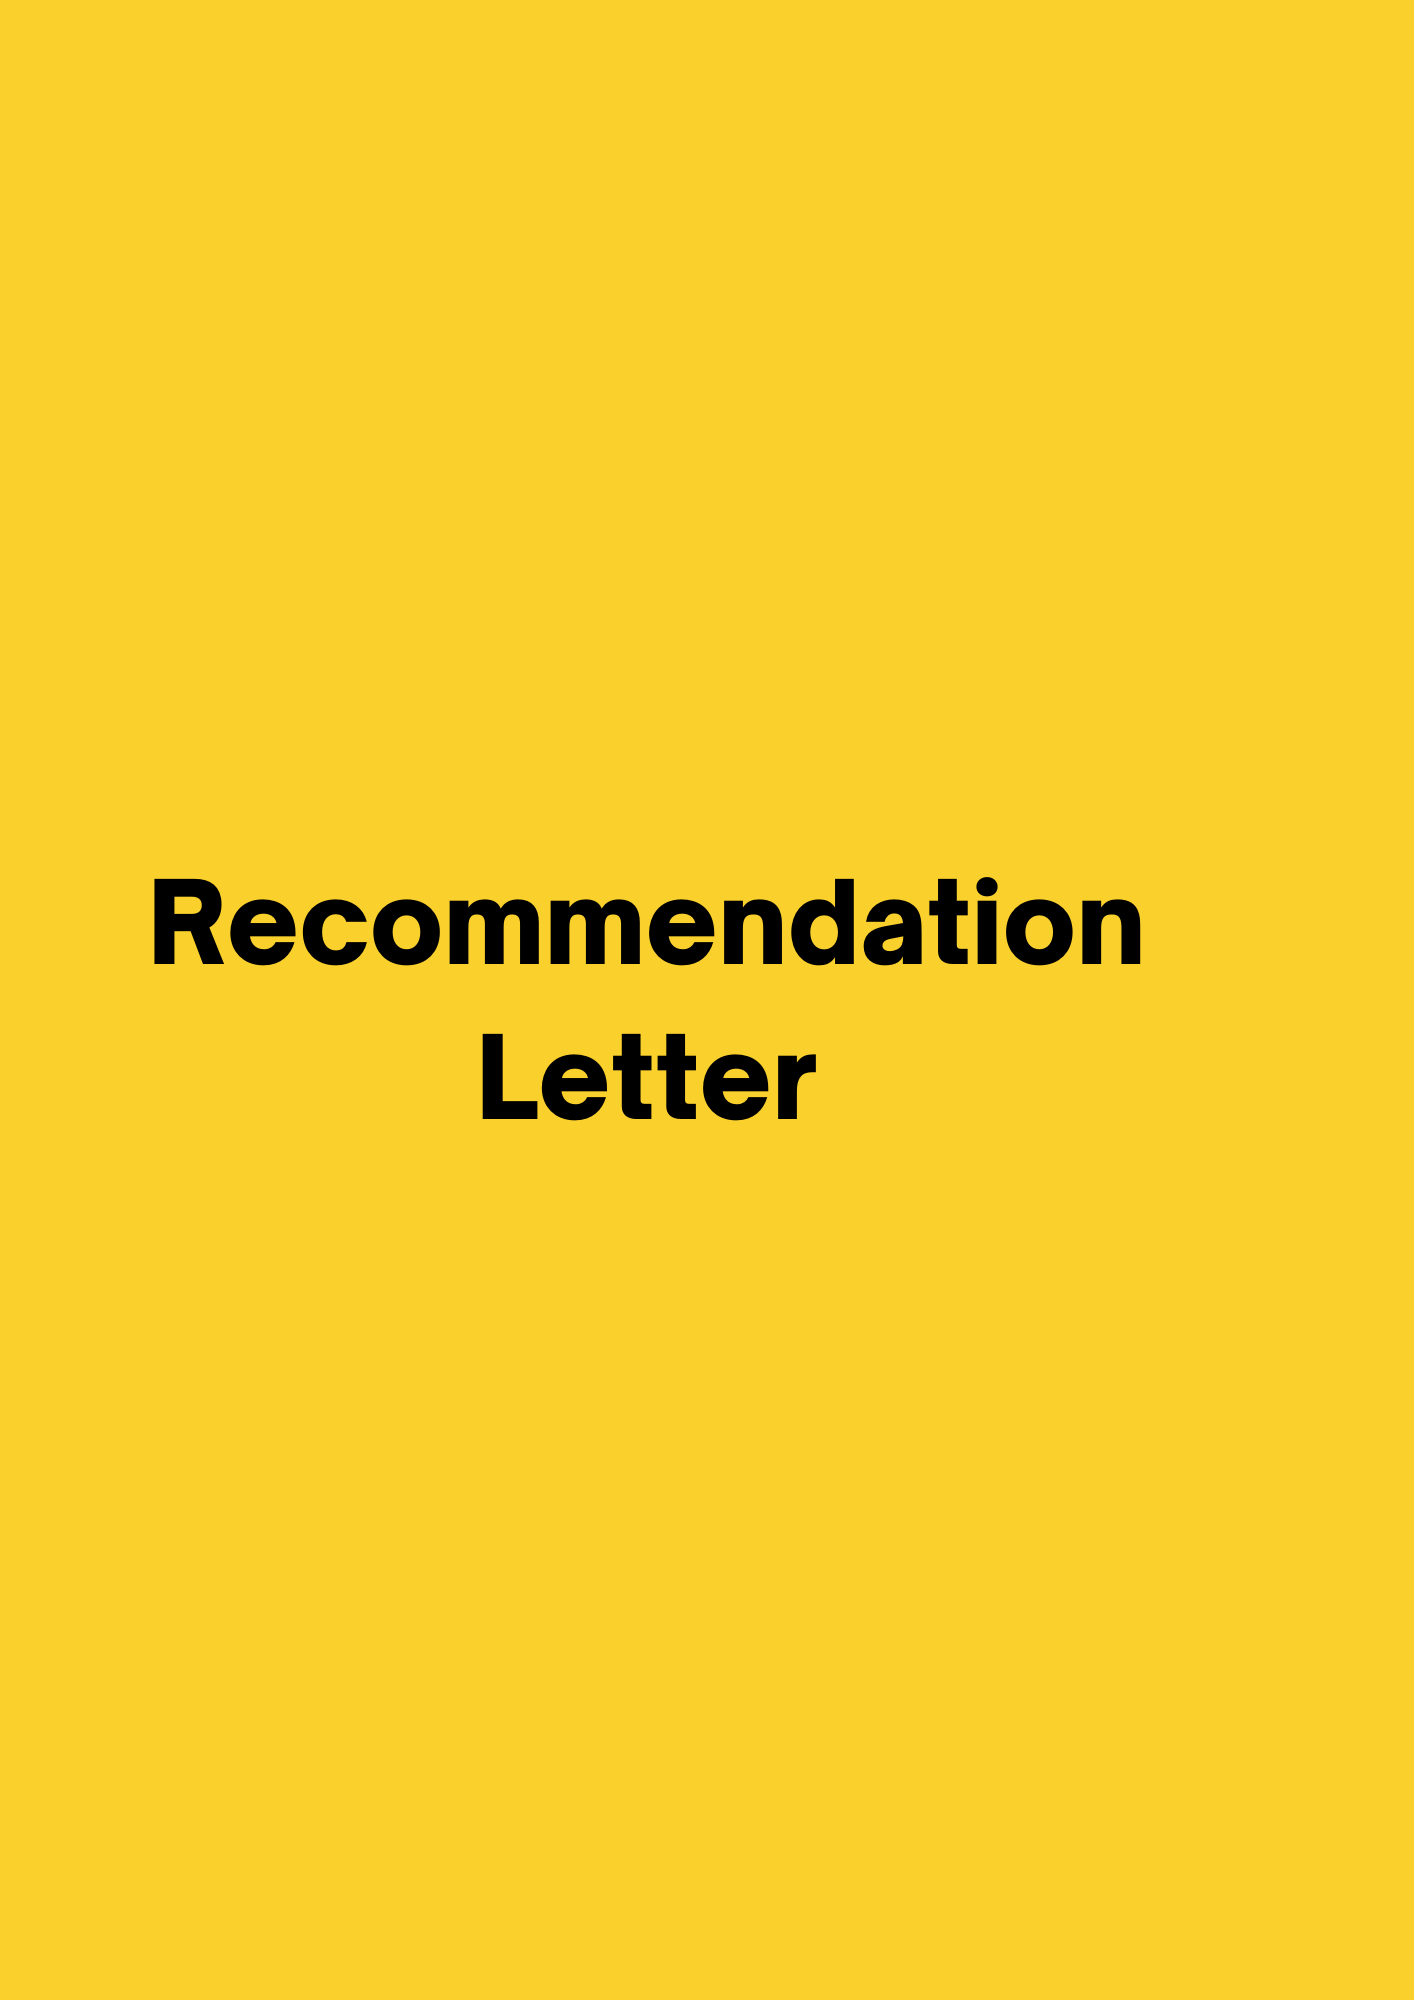 Policy Recommendation Letters